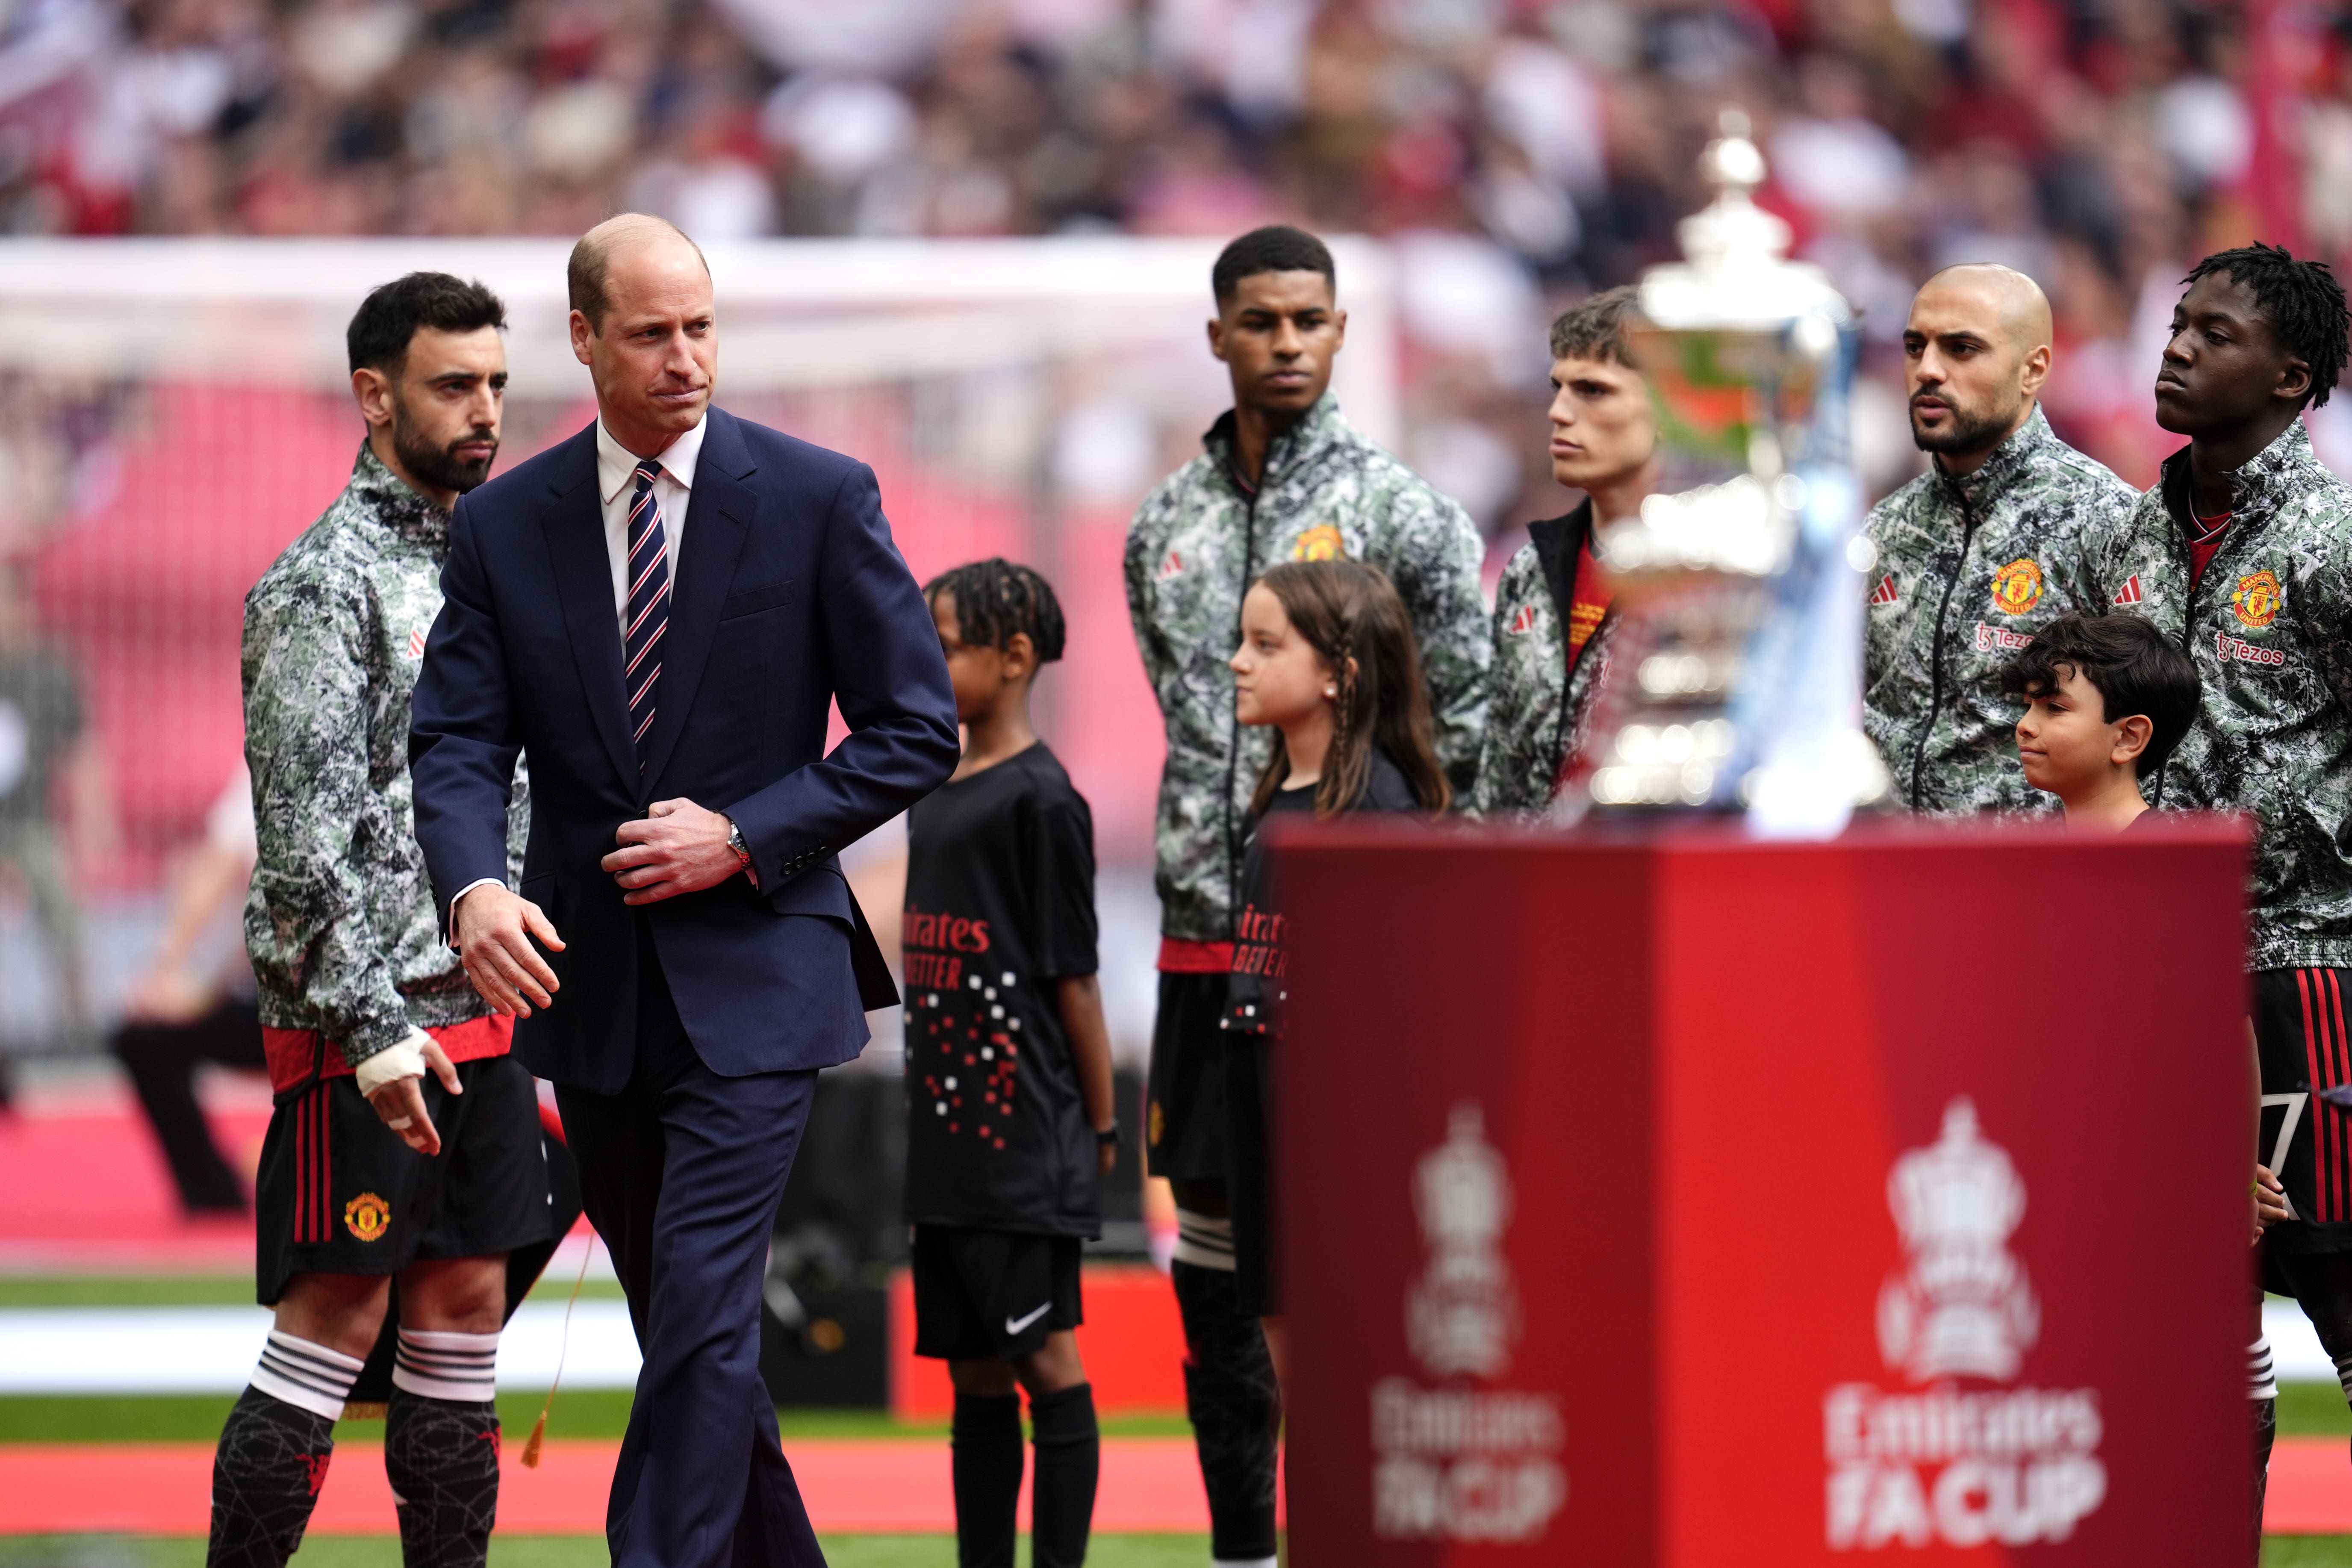 Prince William met the players ahead of kick-off